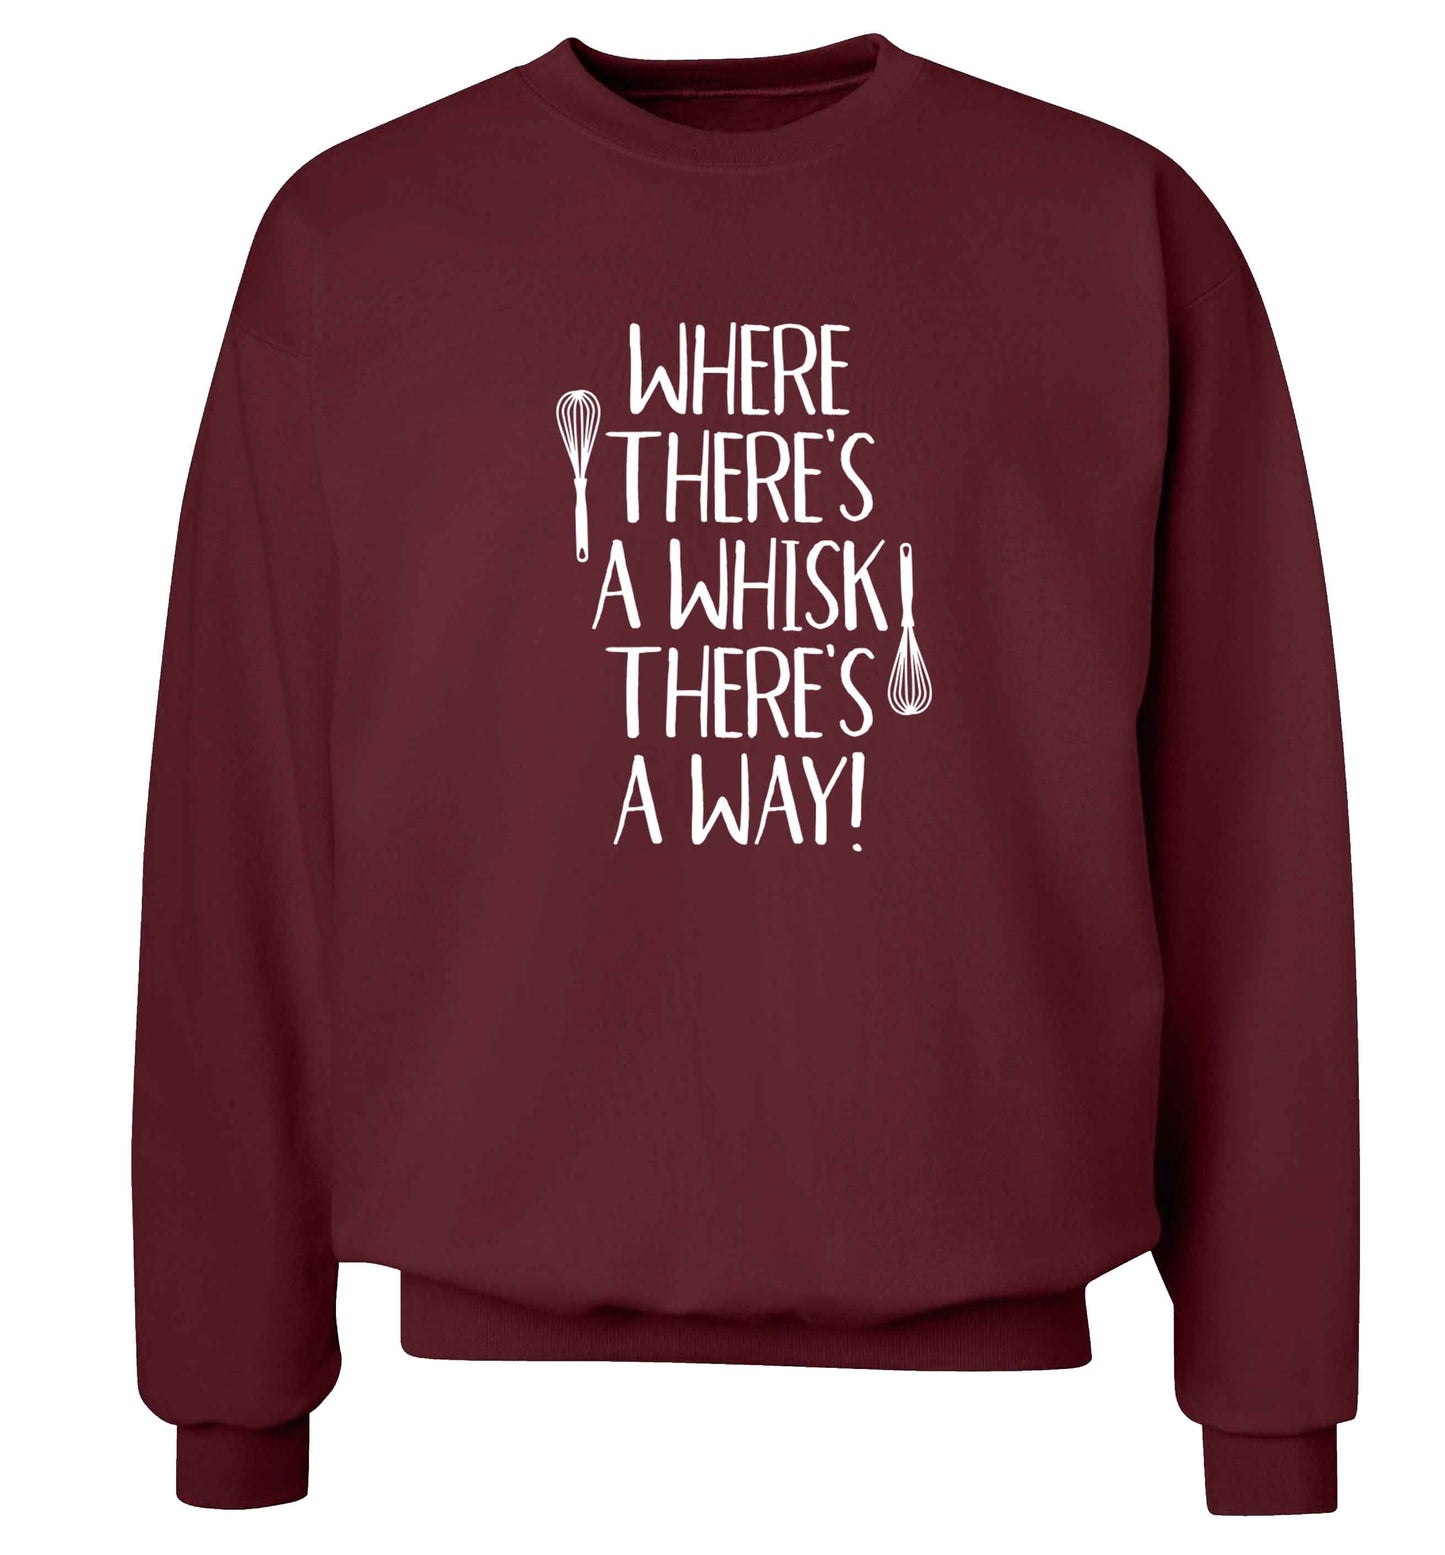 Where there's a whisk there's a way Adult's unisex maroon Sweater 2XL